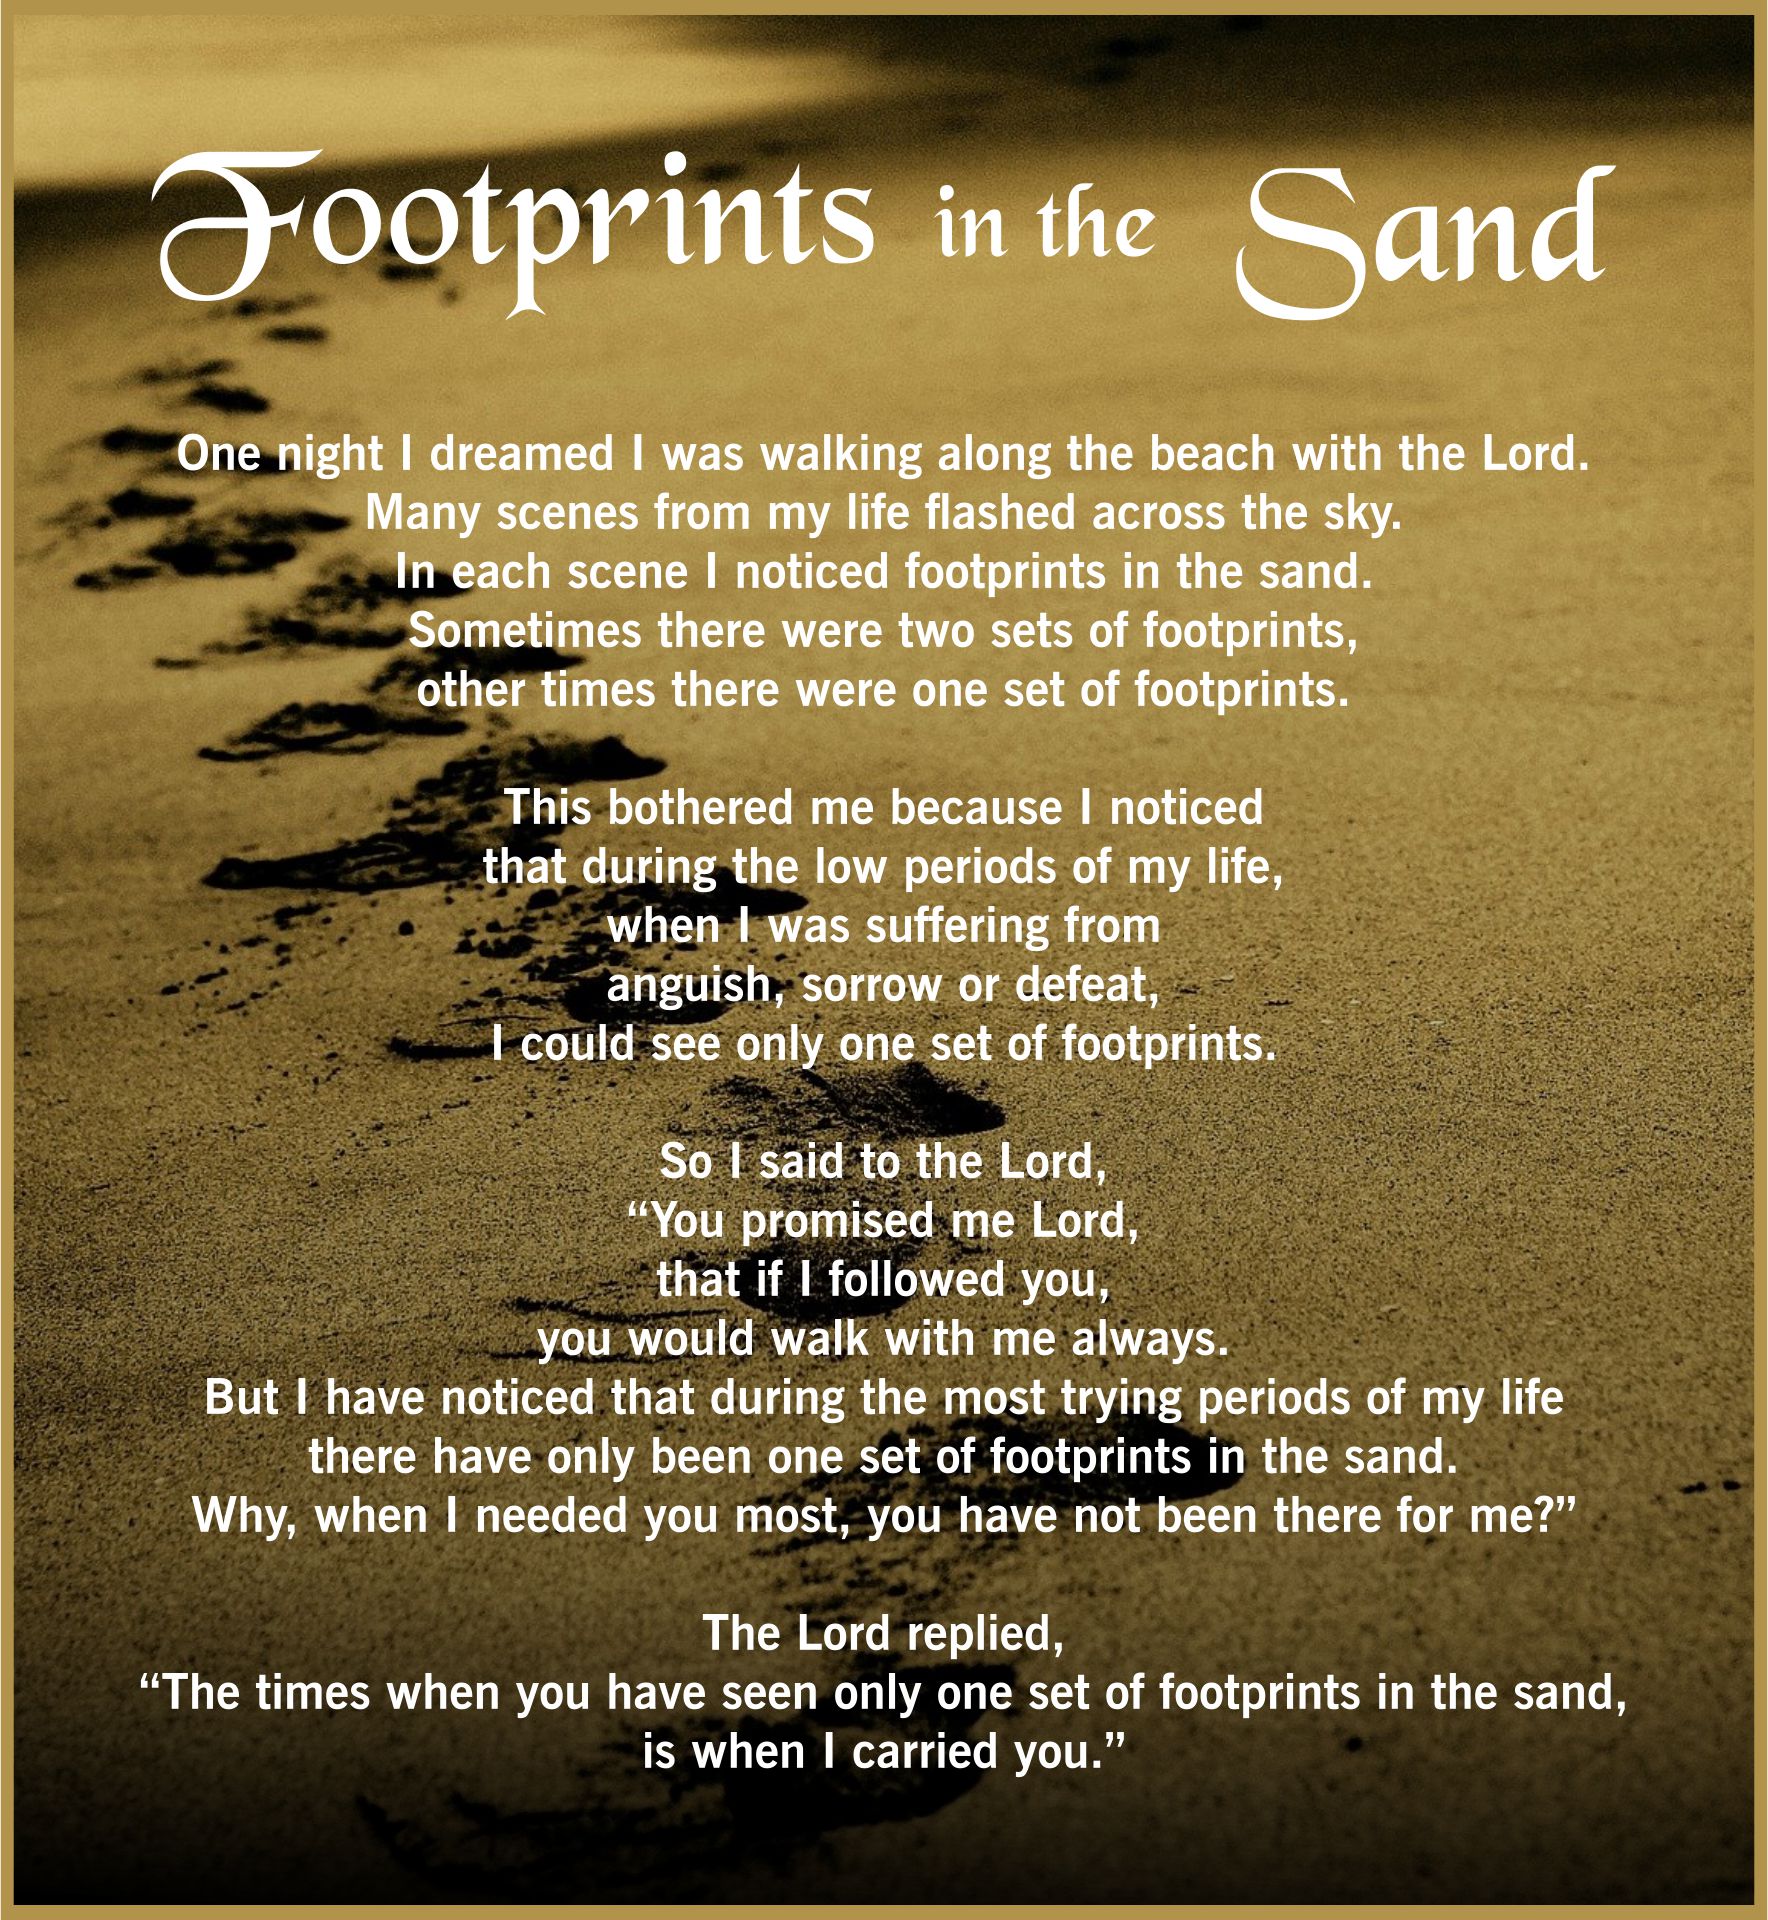 footprints-in-the-sand-poem-85x11-inspirational-print-ready